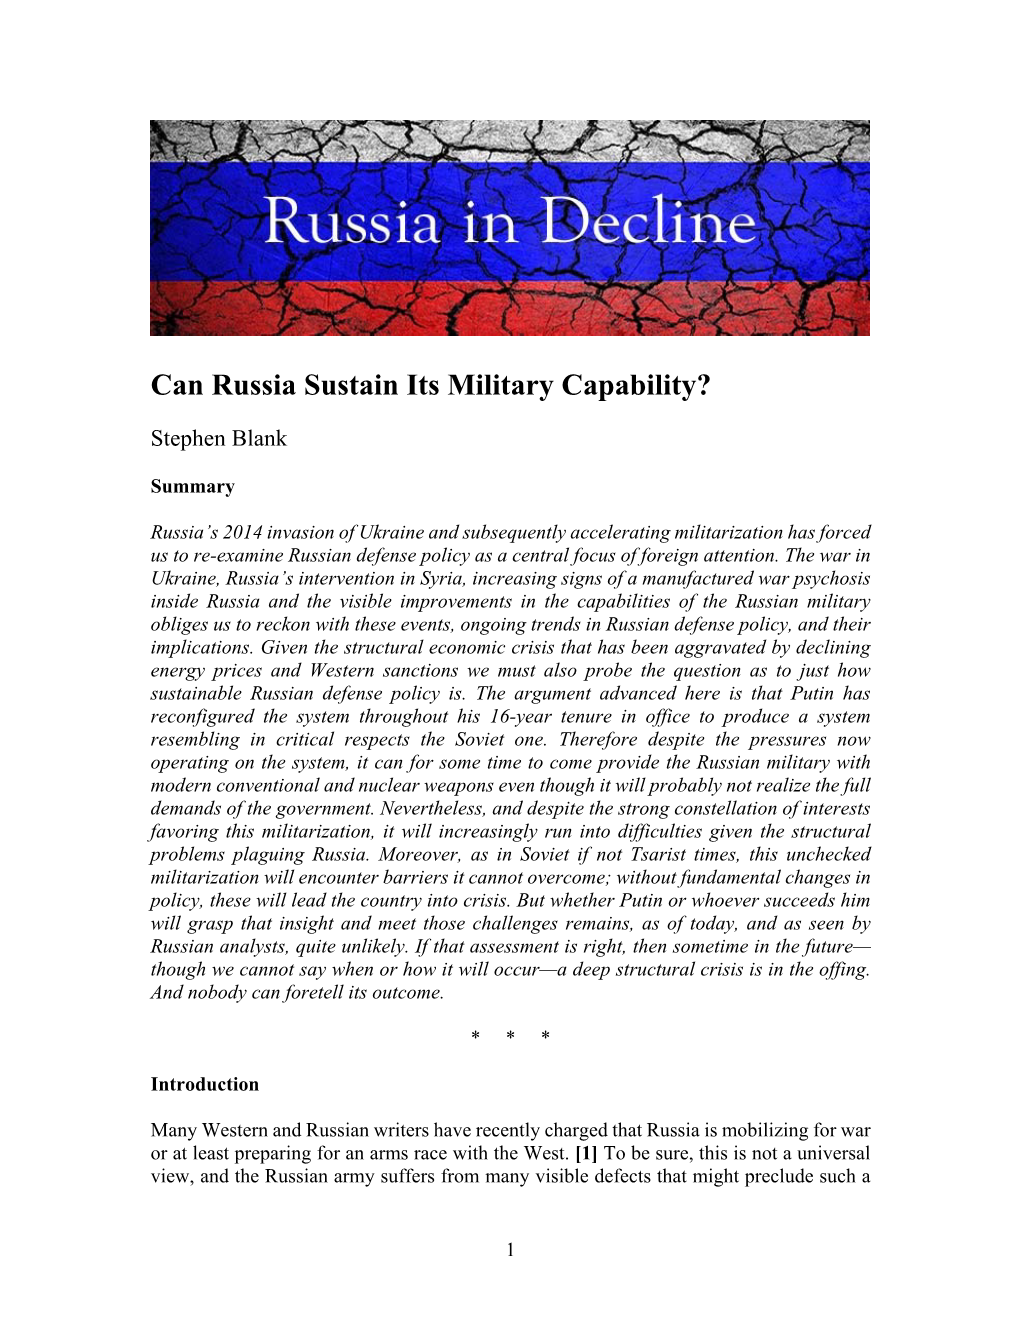 Can Russia Sustain Its Military Capability?